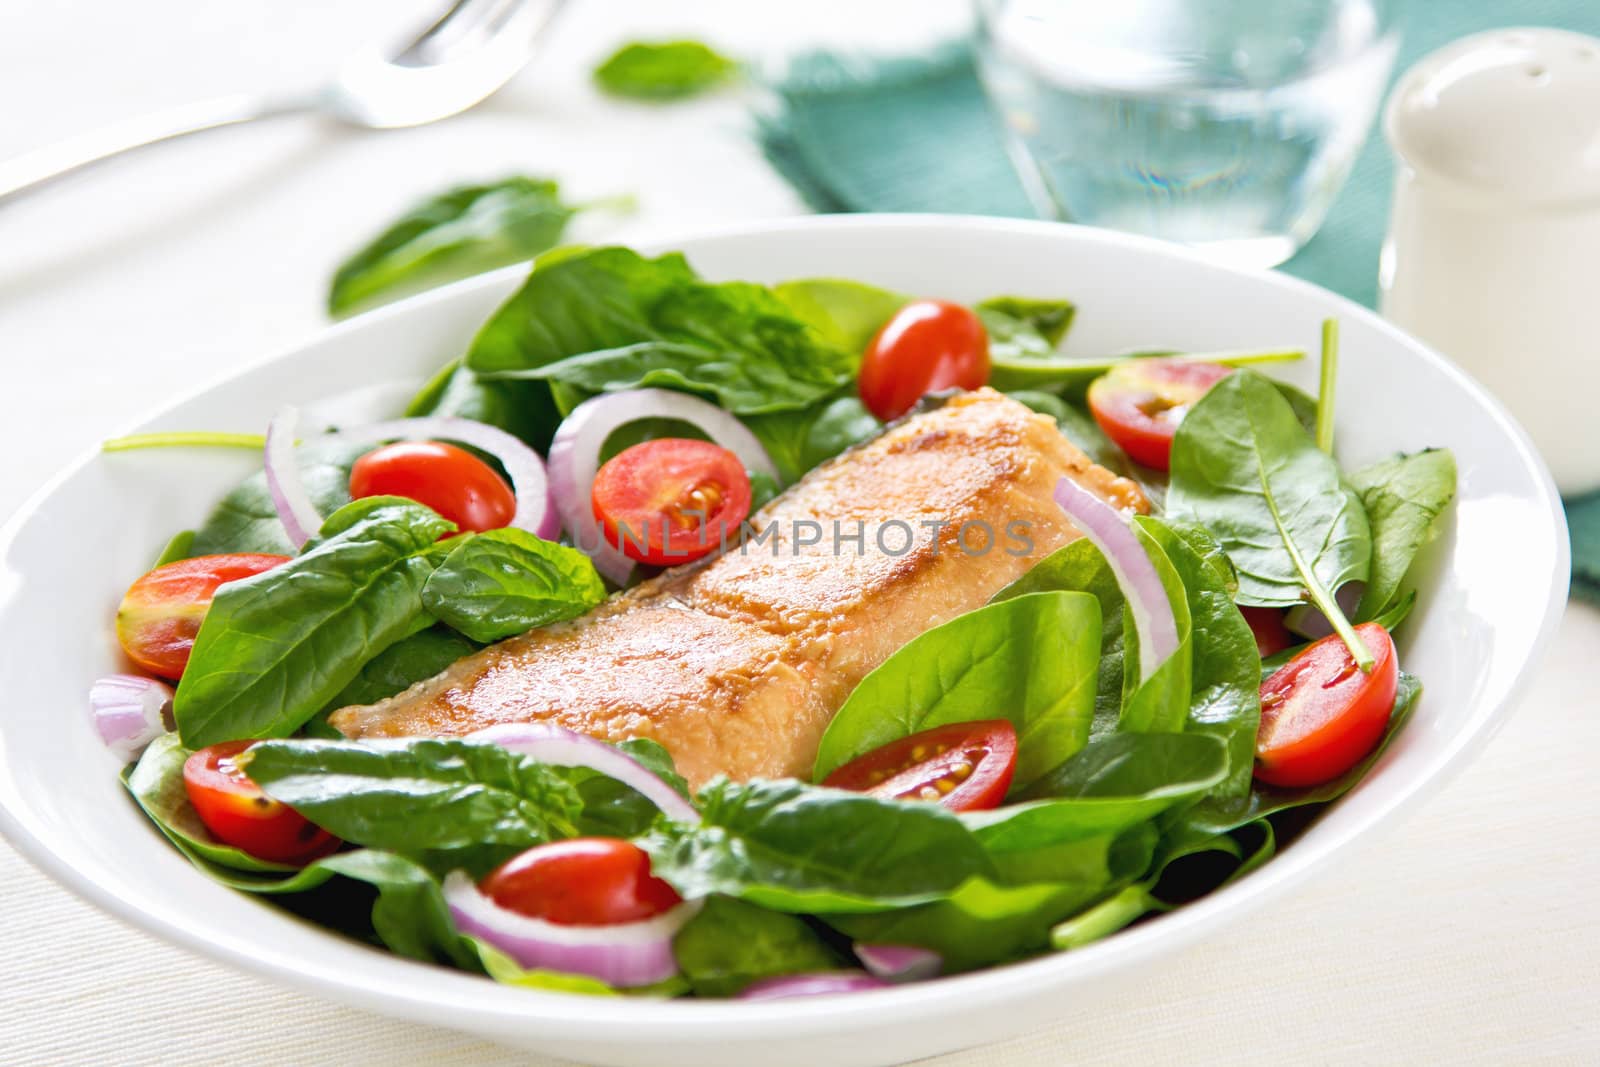 Salmon with Spinach salad by vanillaechoes